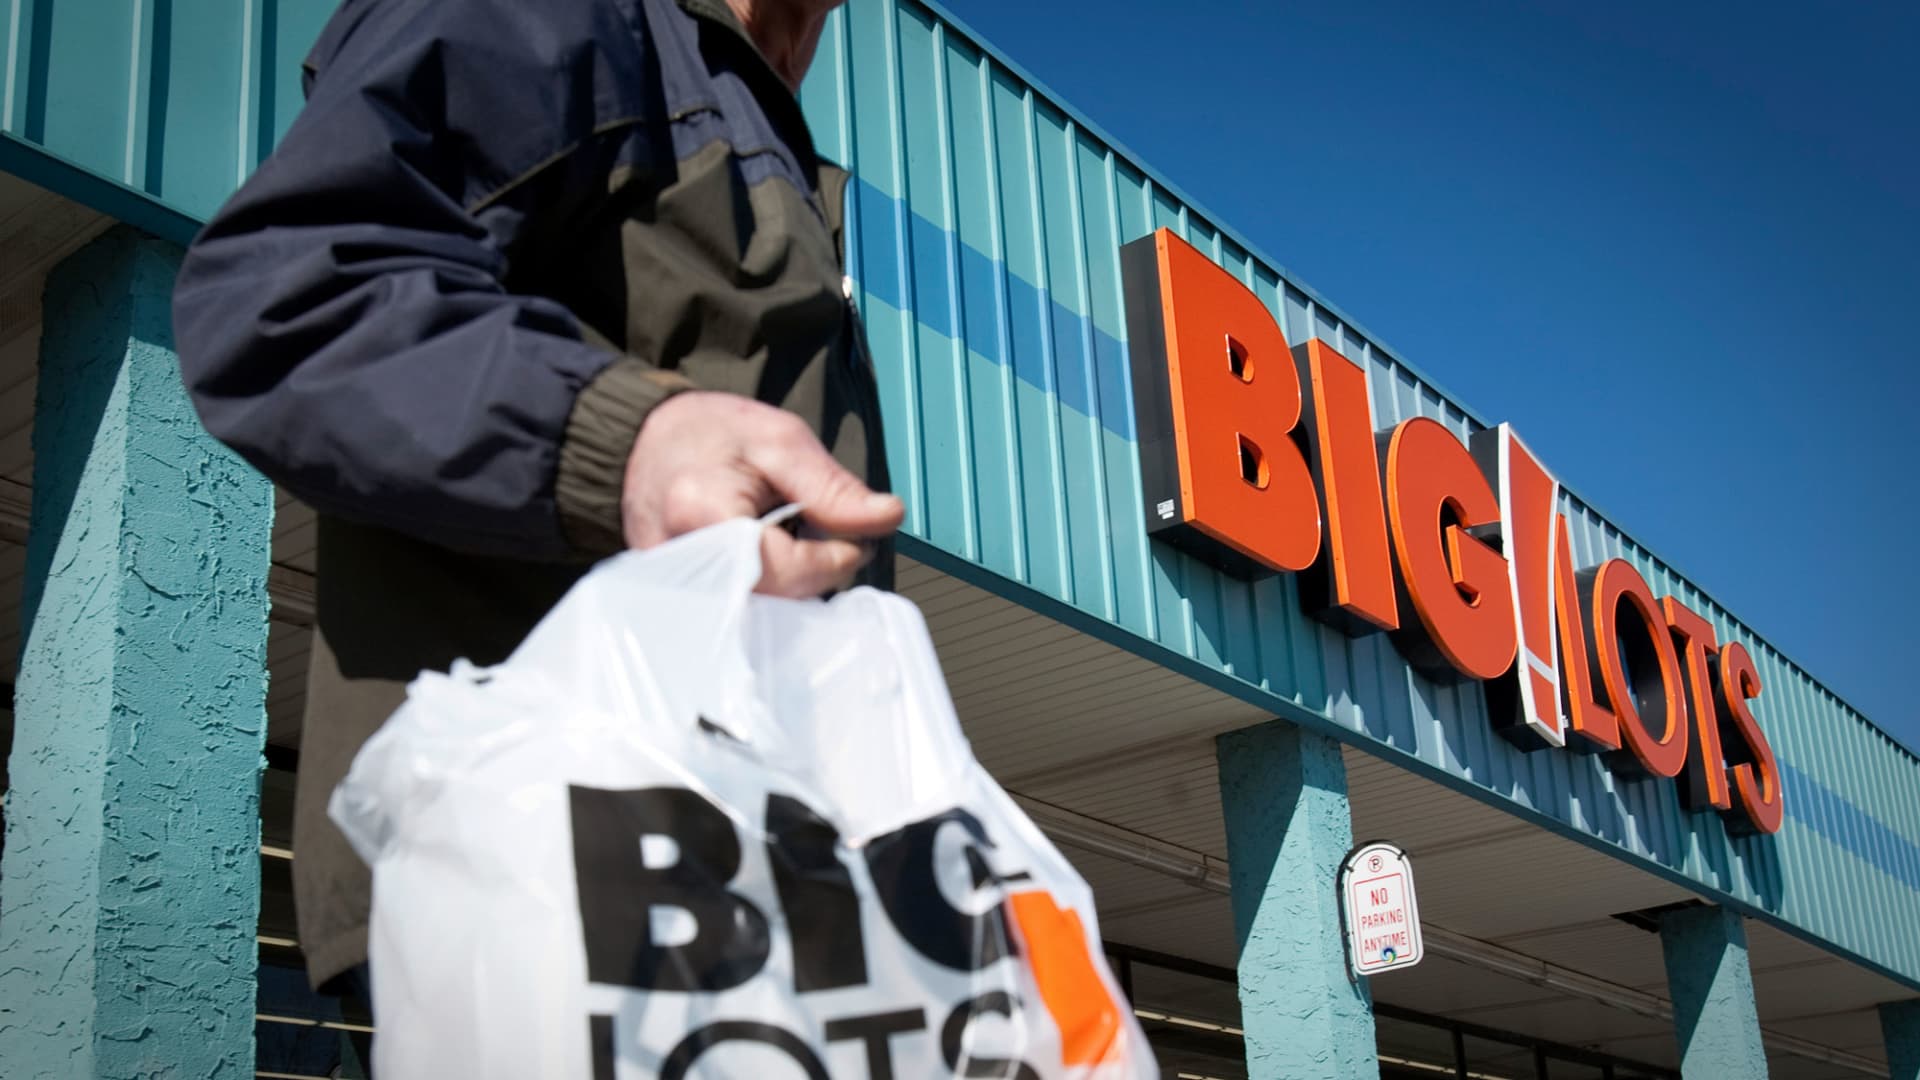 Mill Road calls for a sale of Big Lots. Here’s what we might learn from the firm’s earlier deals